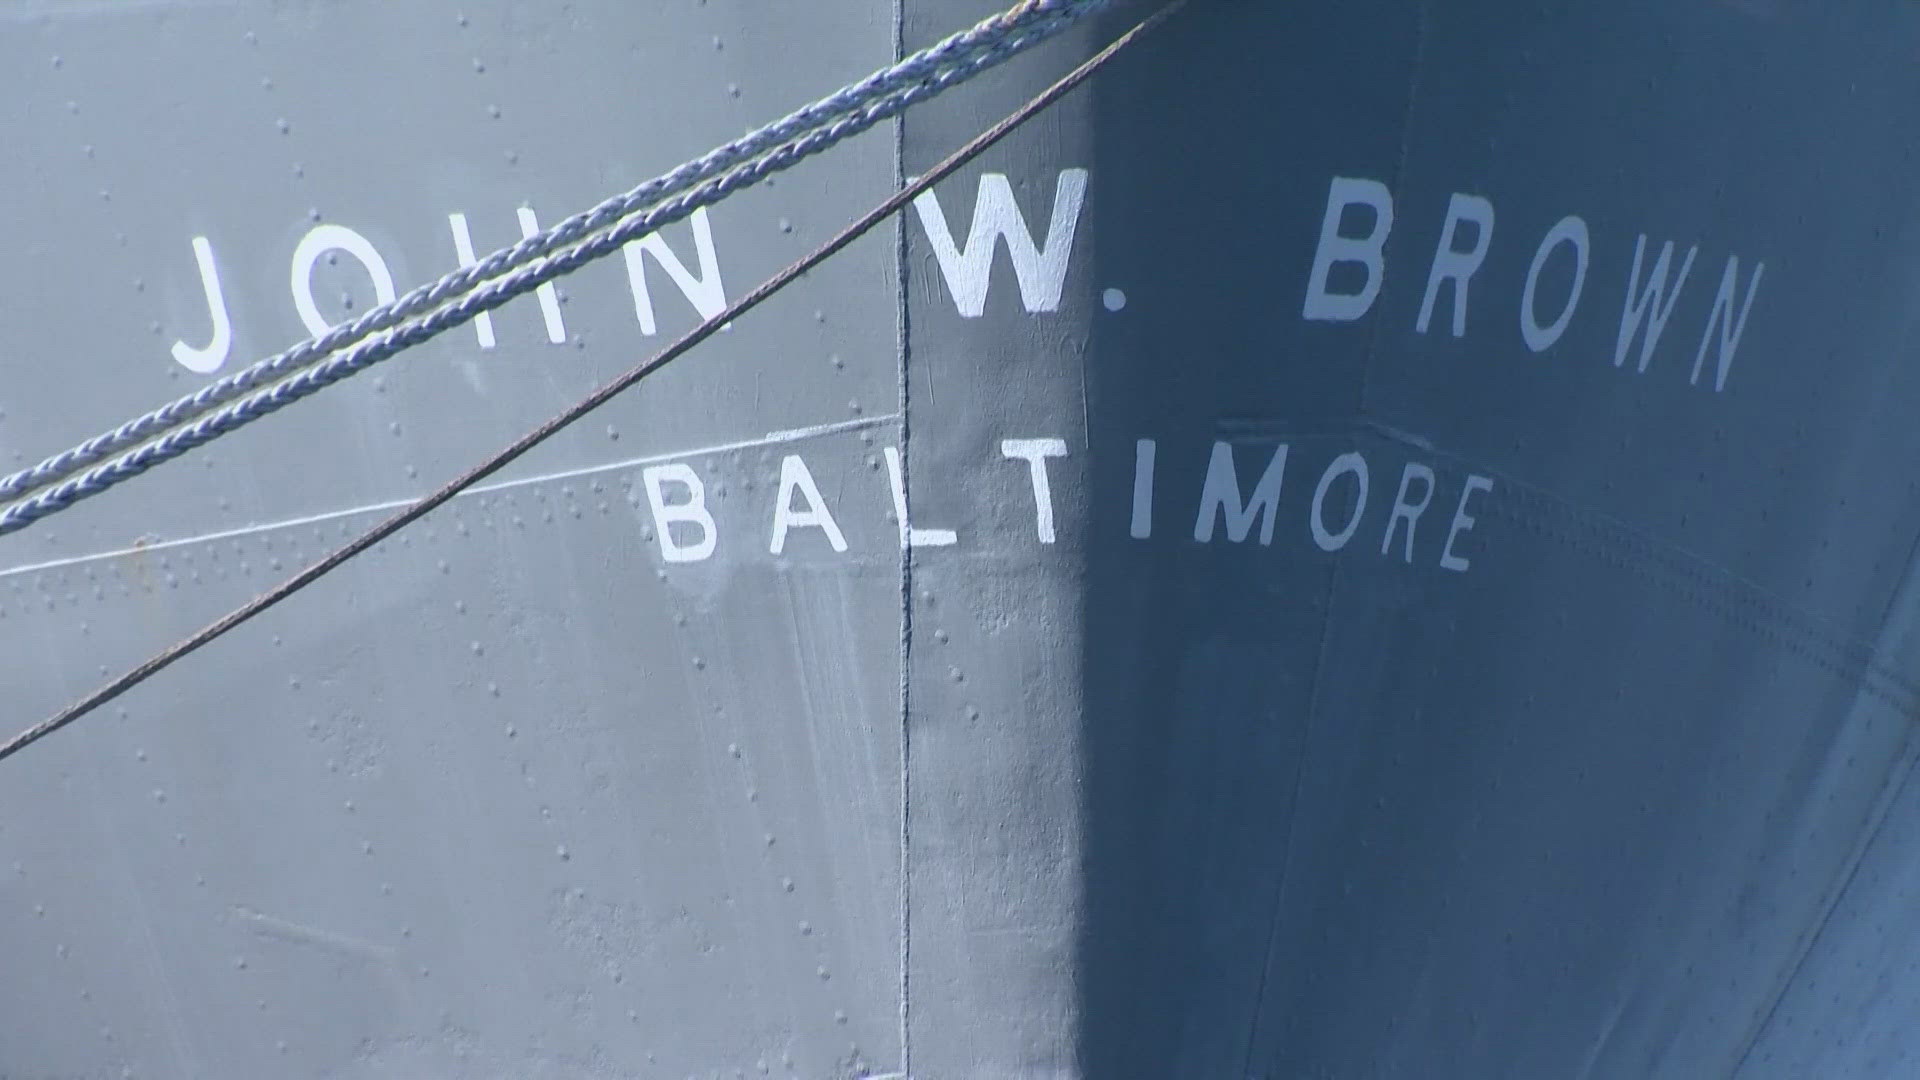 The SS John W. Brown now serves as a floating museum in Baltimore's Canton Marine terminal.